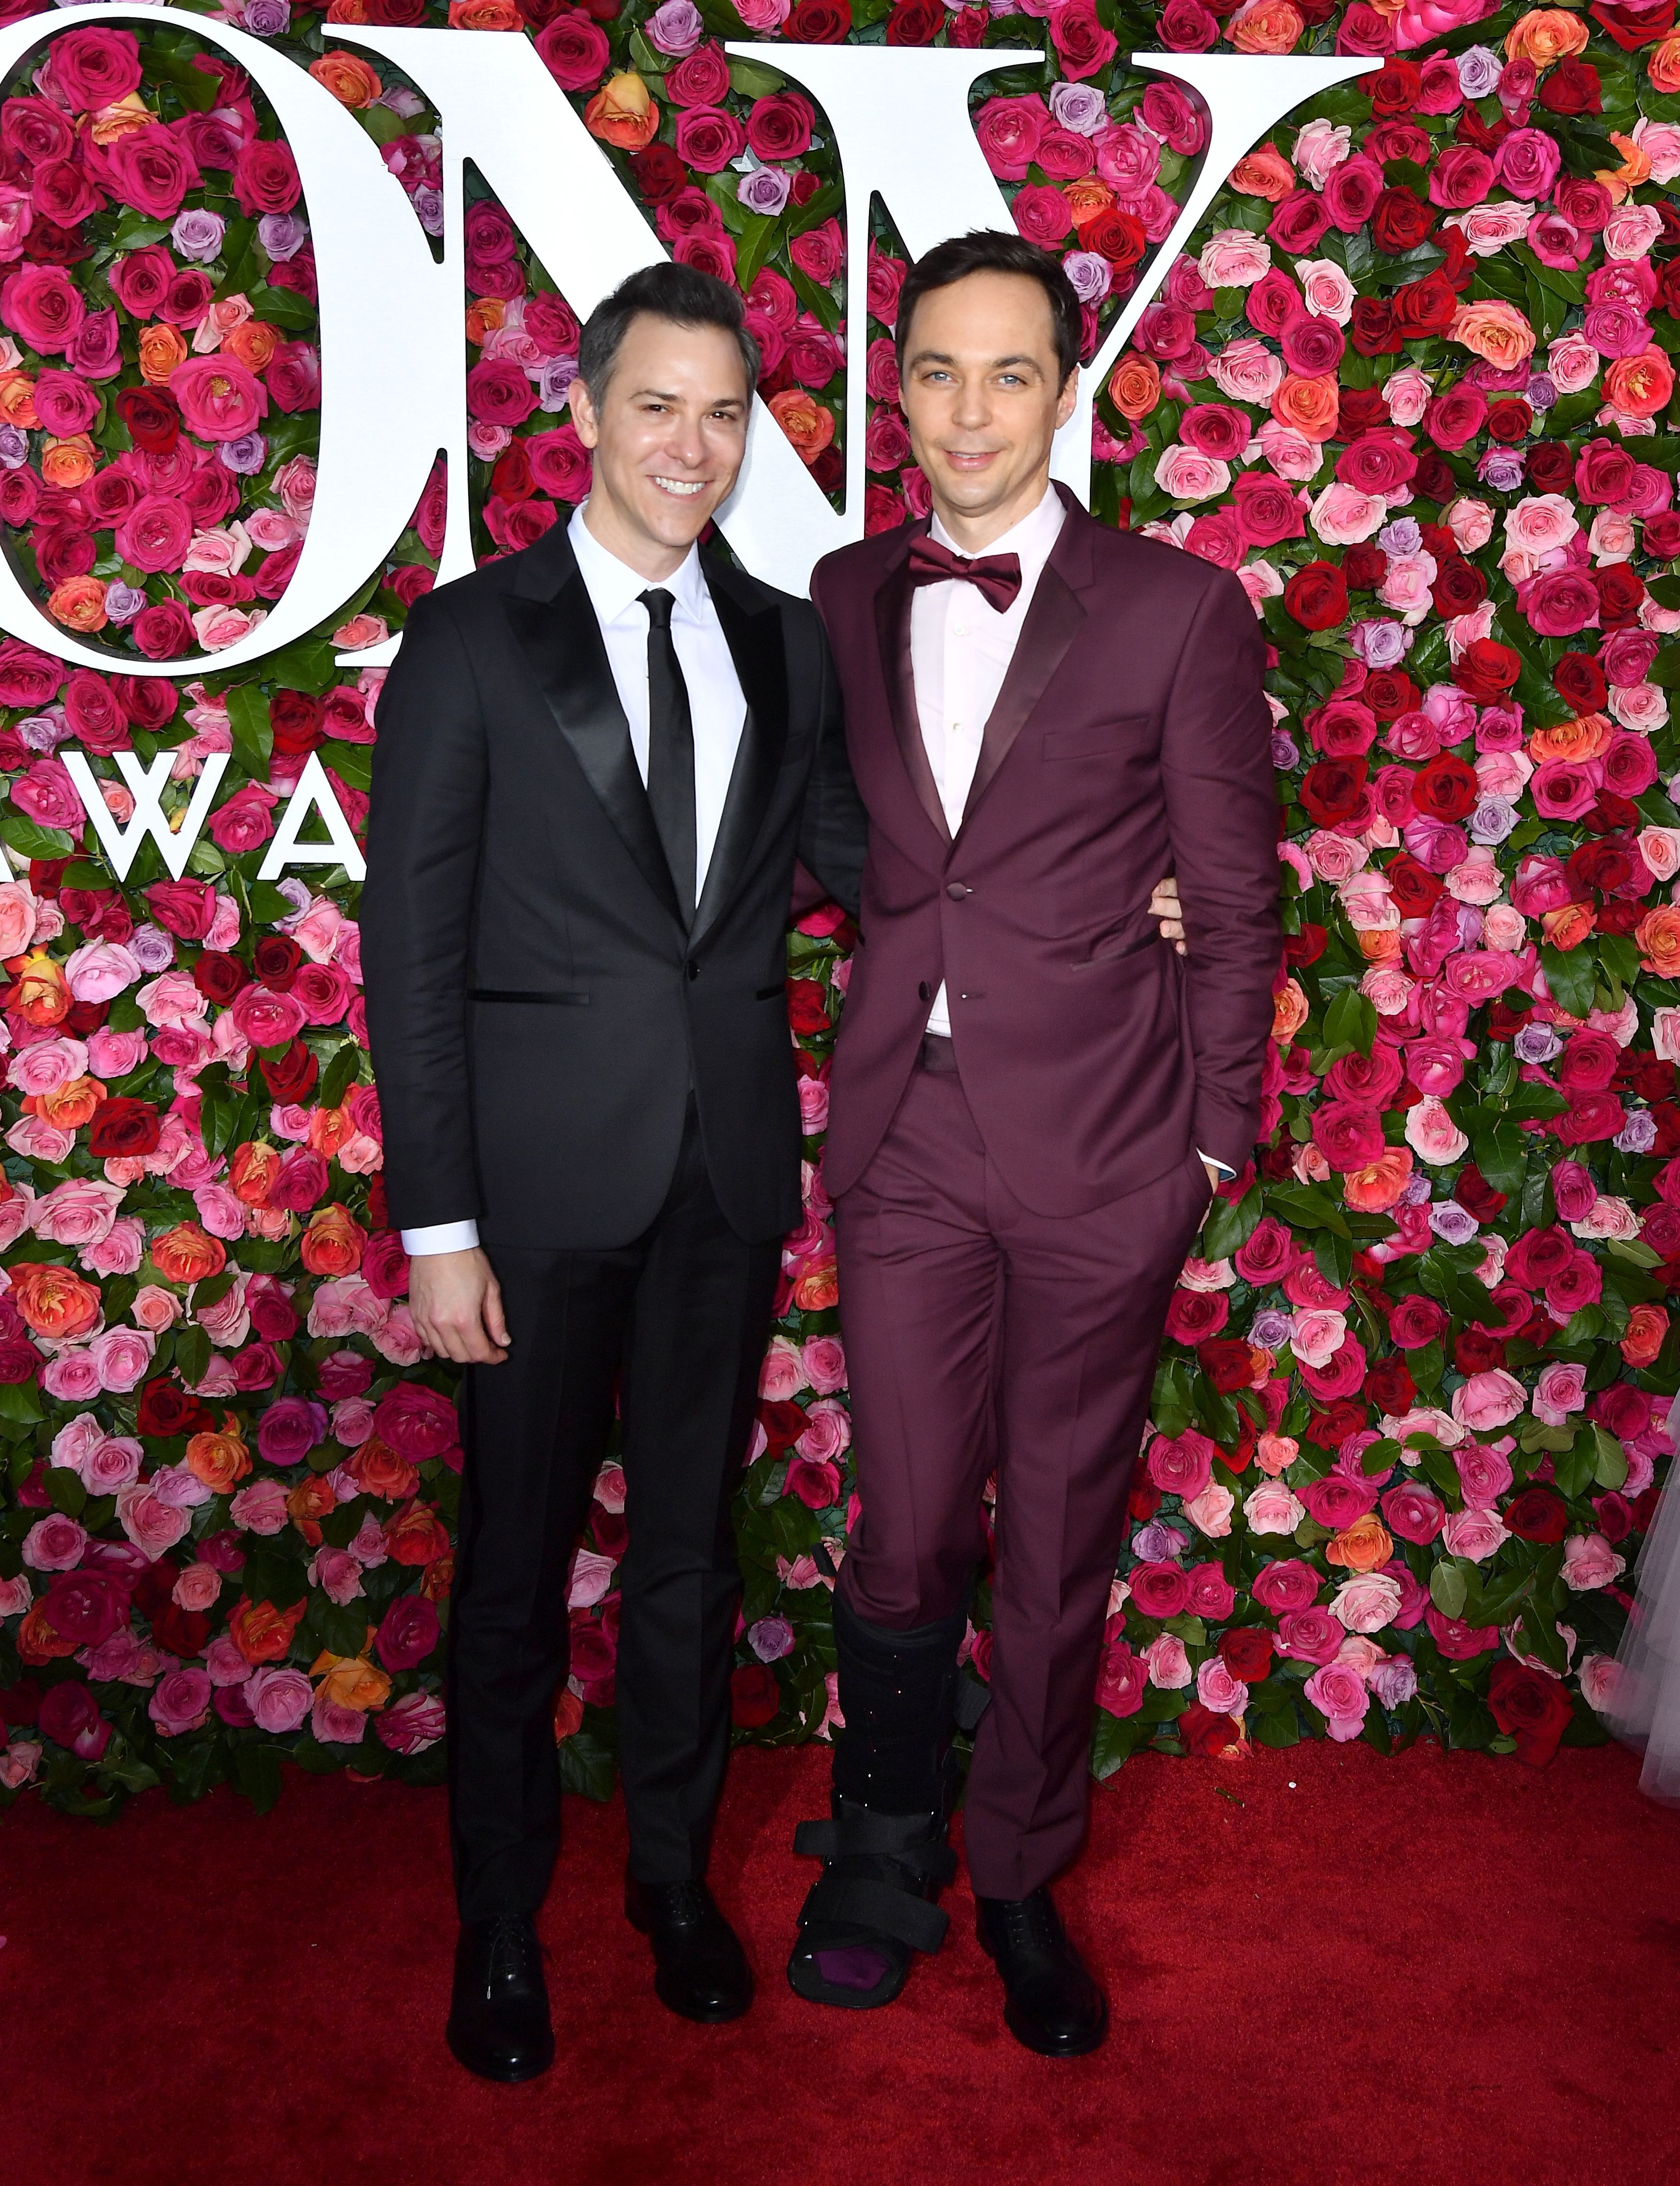 Todd Spiewak and US actor Jim Parsons at Radio City Music Hall in New York City on June 10, 2018. | Source: Getty Images